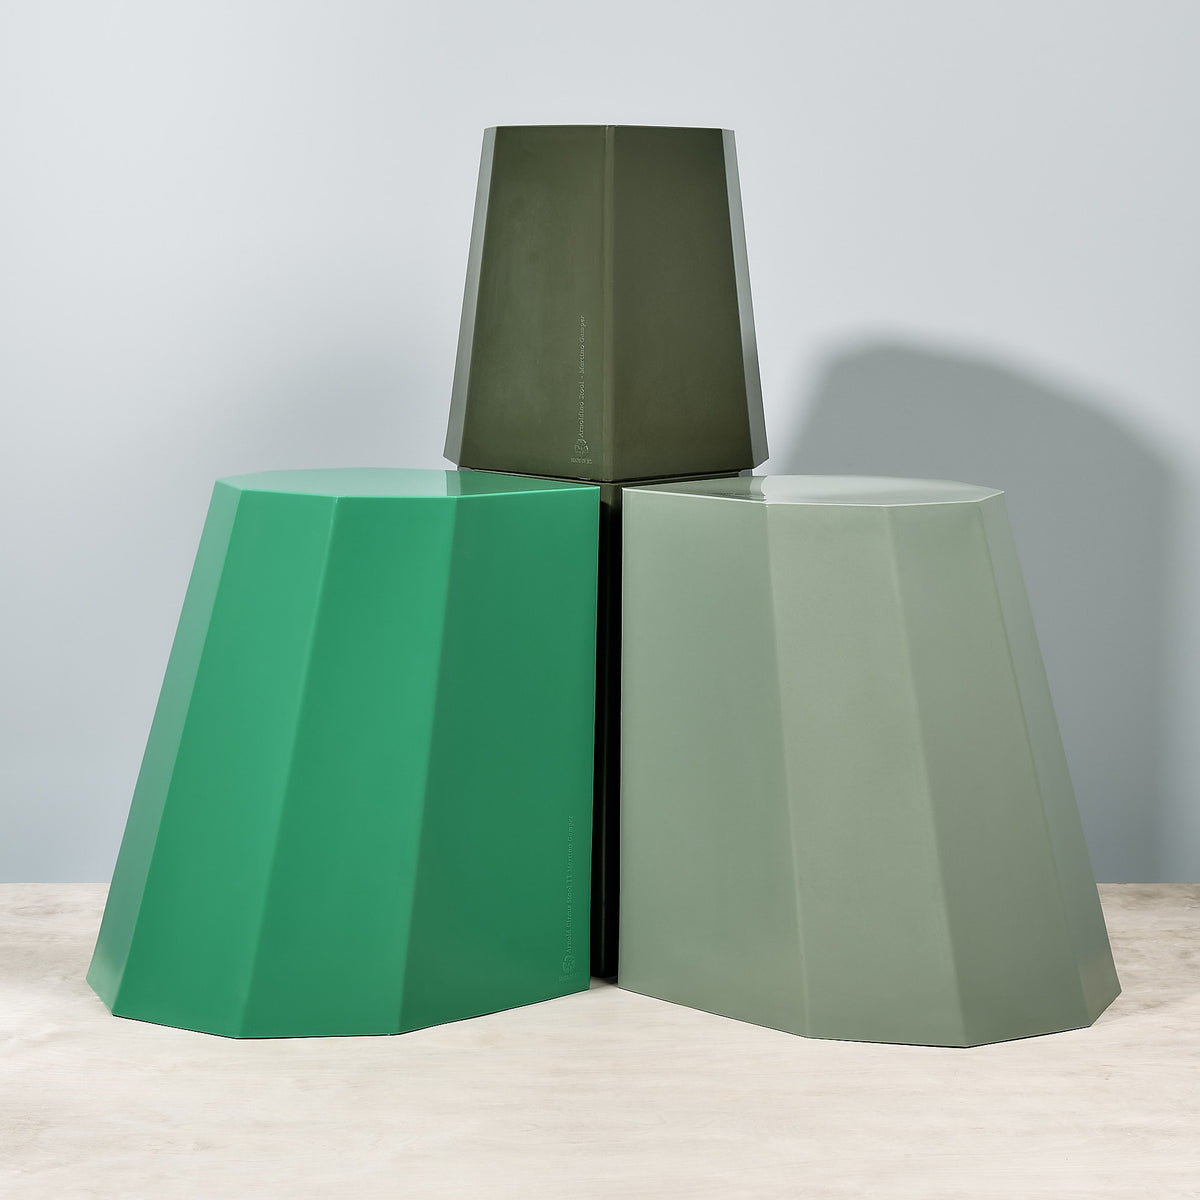 Three Arnold Circus Stools - Bright Green by Martino Gamper on a wooden table.